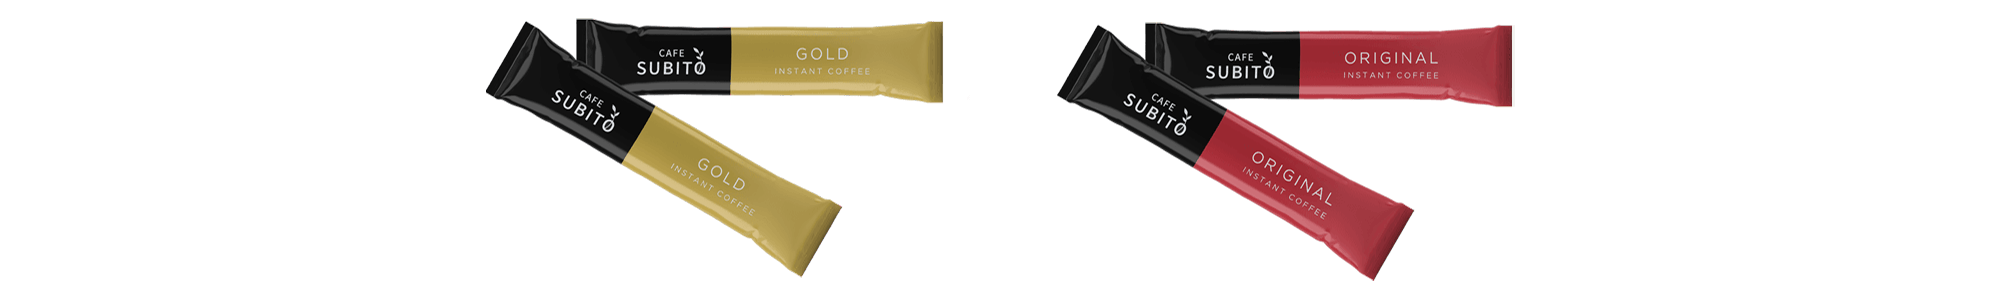 instant coffee packets